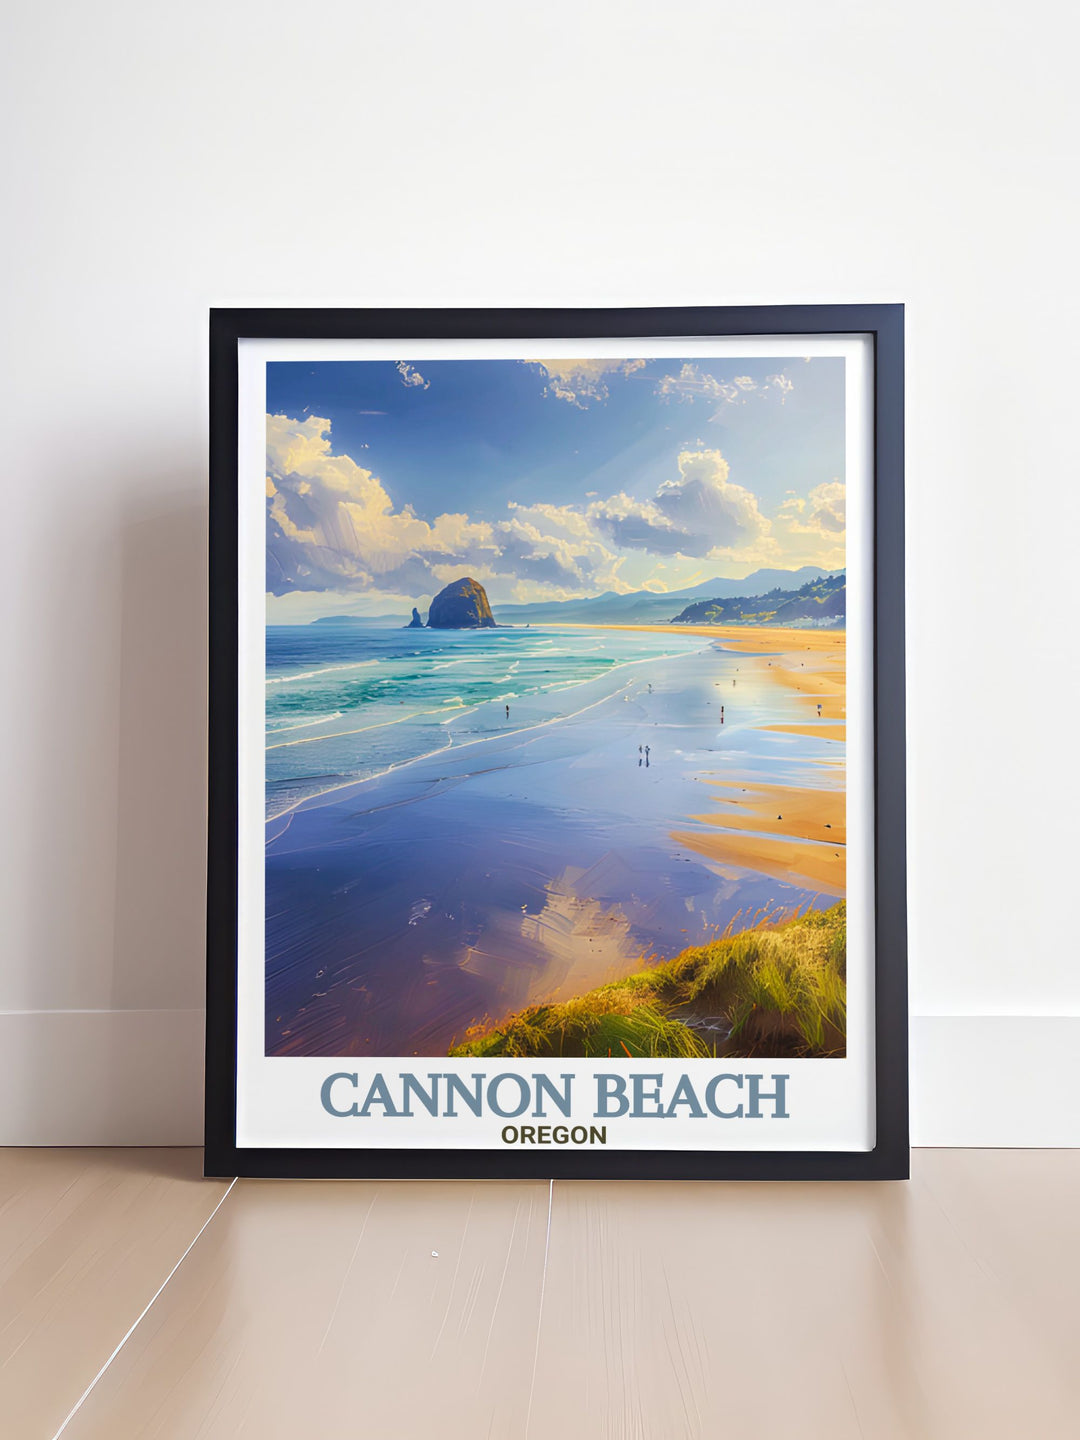 Elegant Cannon Beach map art print featuring detailed street maps and landmarks making it a unique addition to any wall art collection and a perfect gift for travel enthusiasts